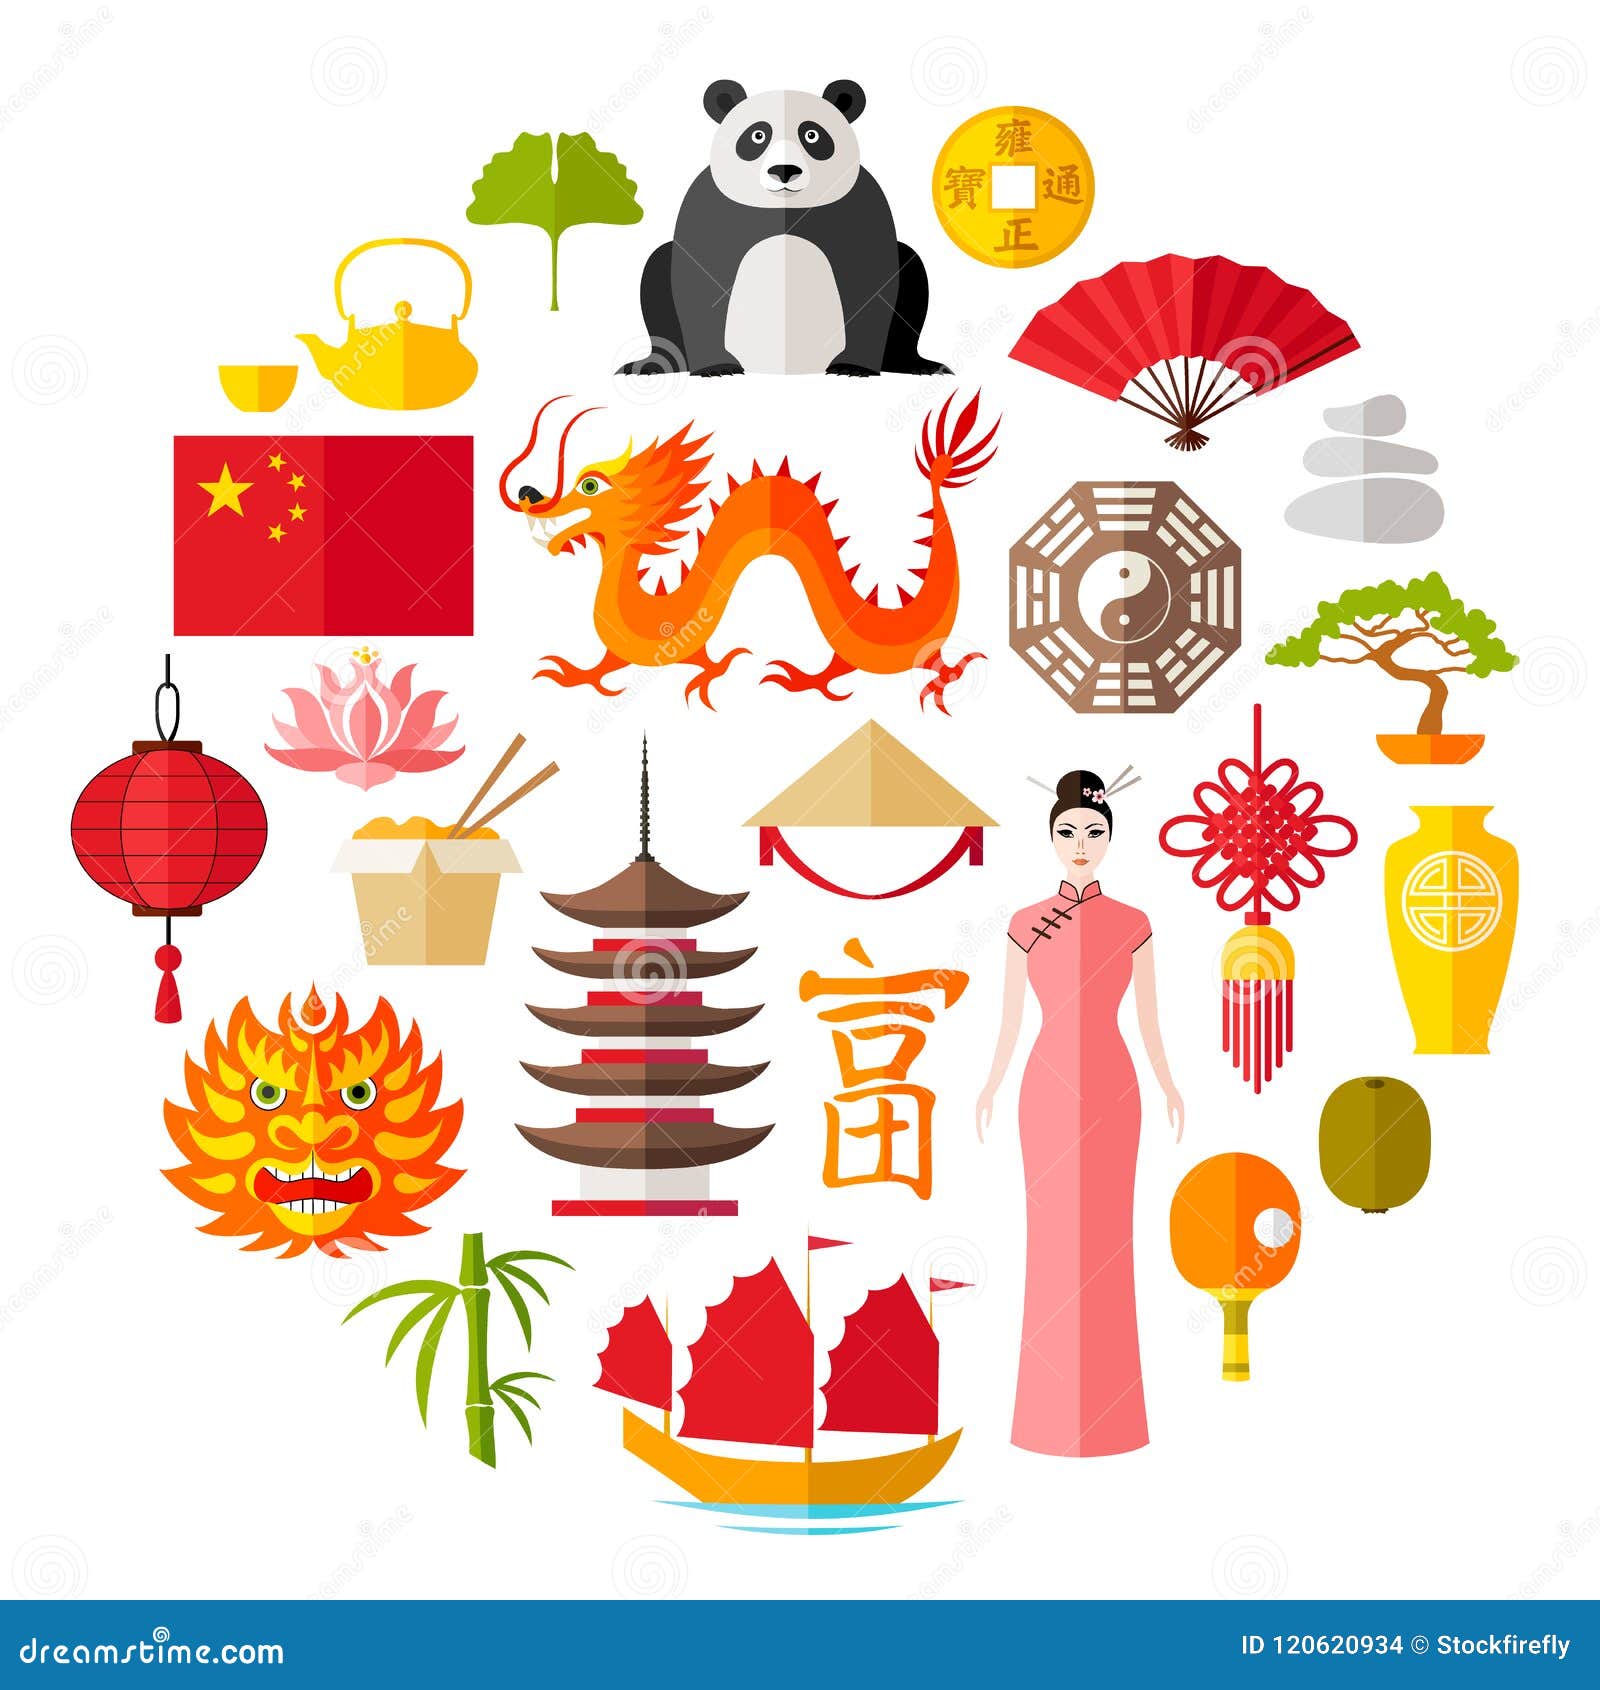 vector-chinese-symbols-icons-china-traditional-souvenirs-accessories-attributes-set-tourist-theme-120620934.jpg